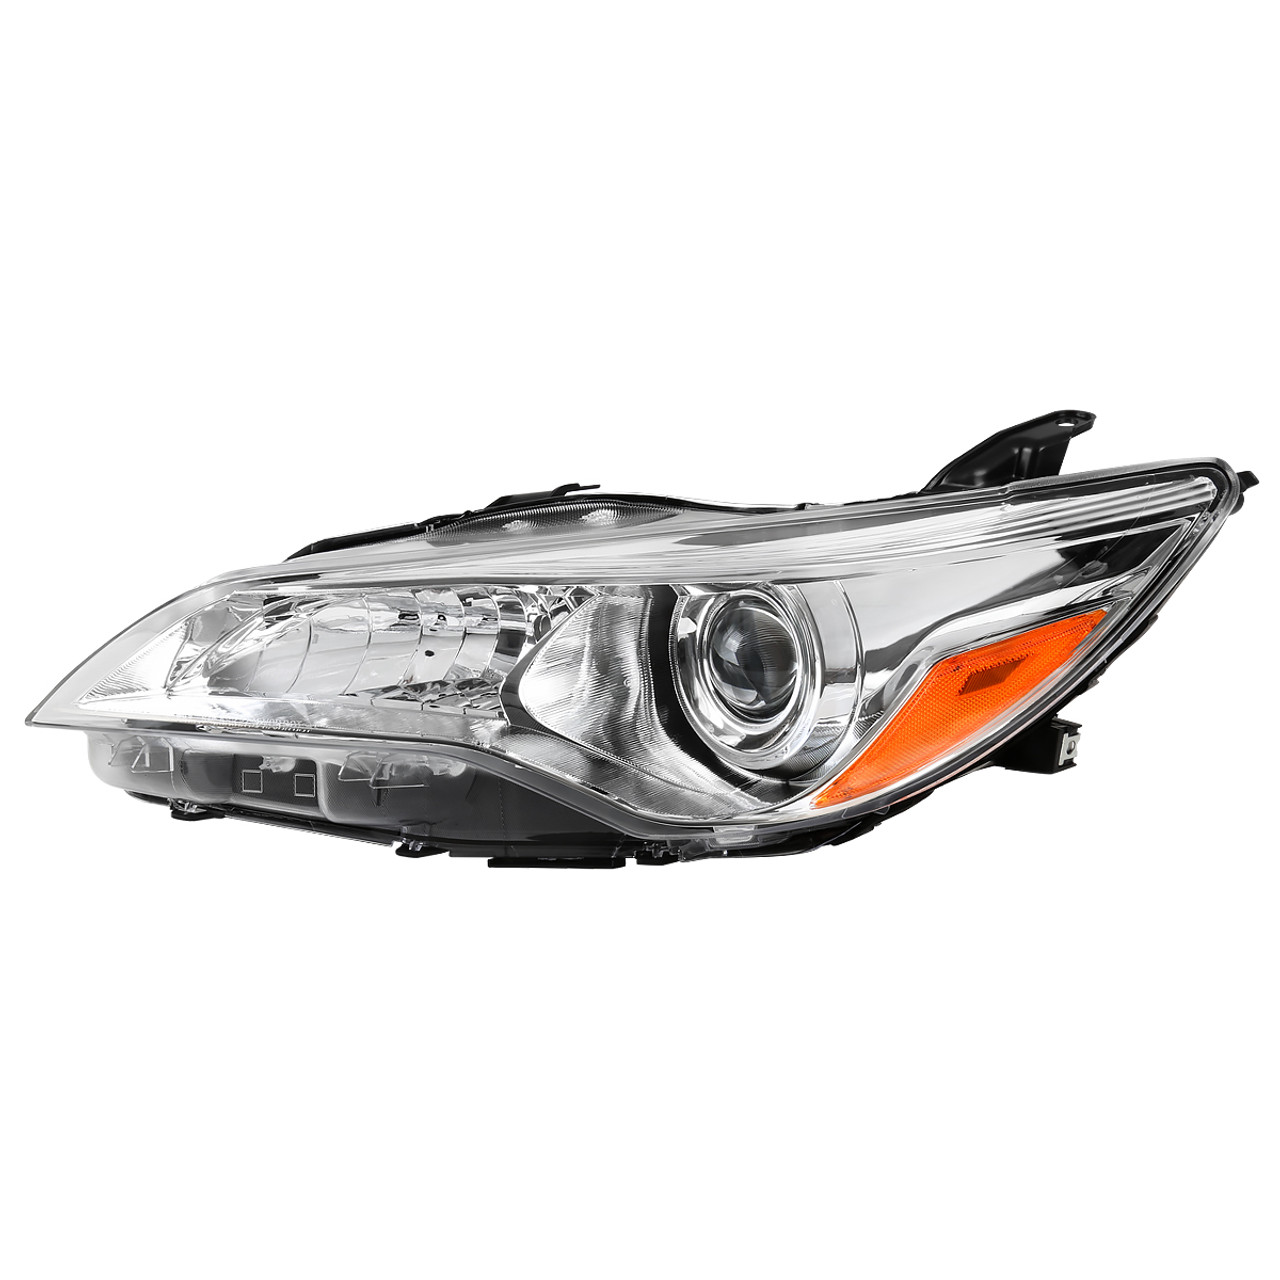 What is a headlight assembly? Projector & Reflector